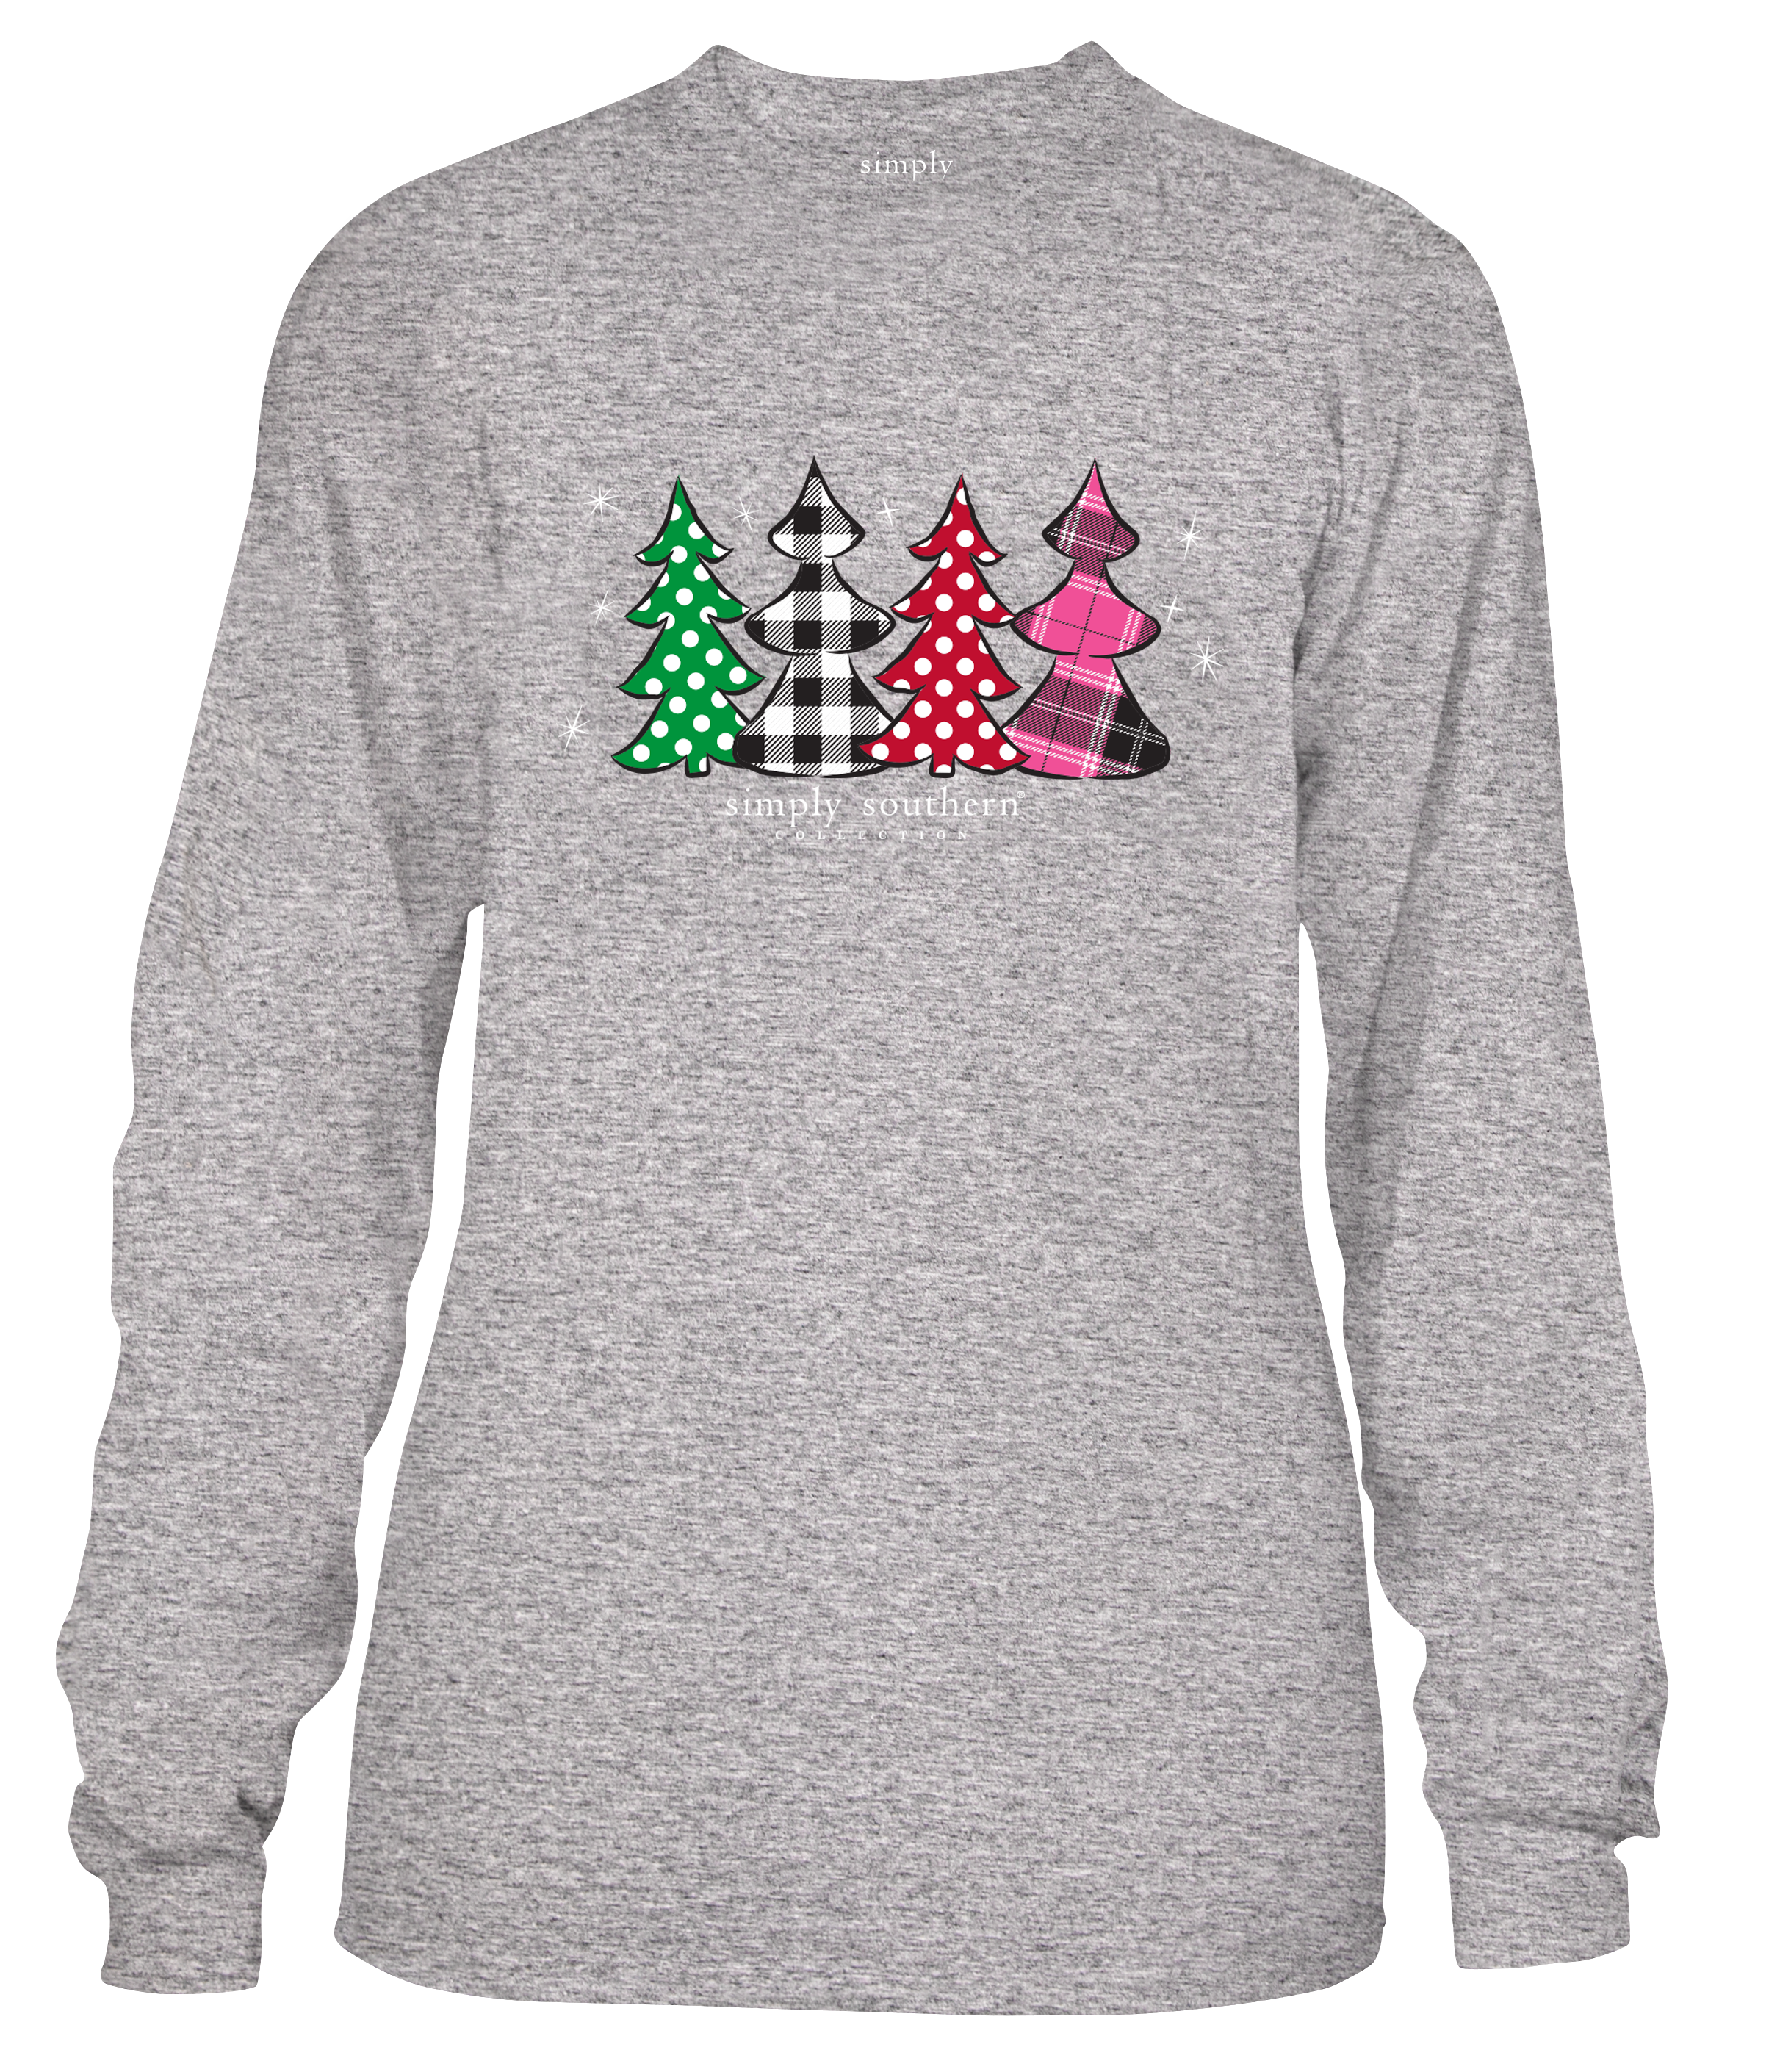 Youth 'Messy & Bright' Christmas Long Sleeve Tee by Simply Southern